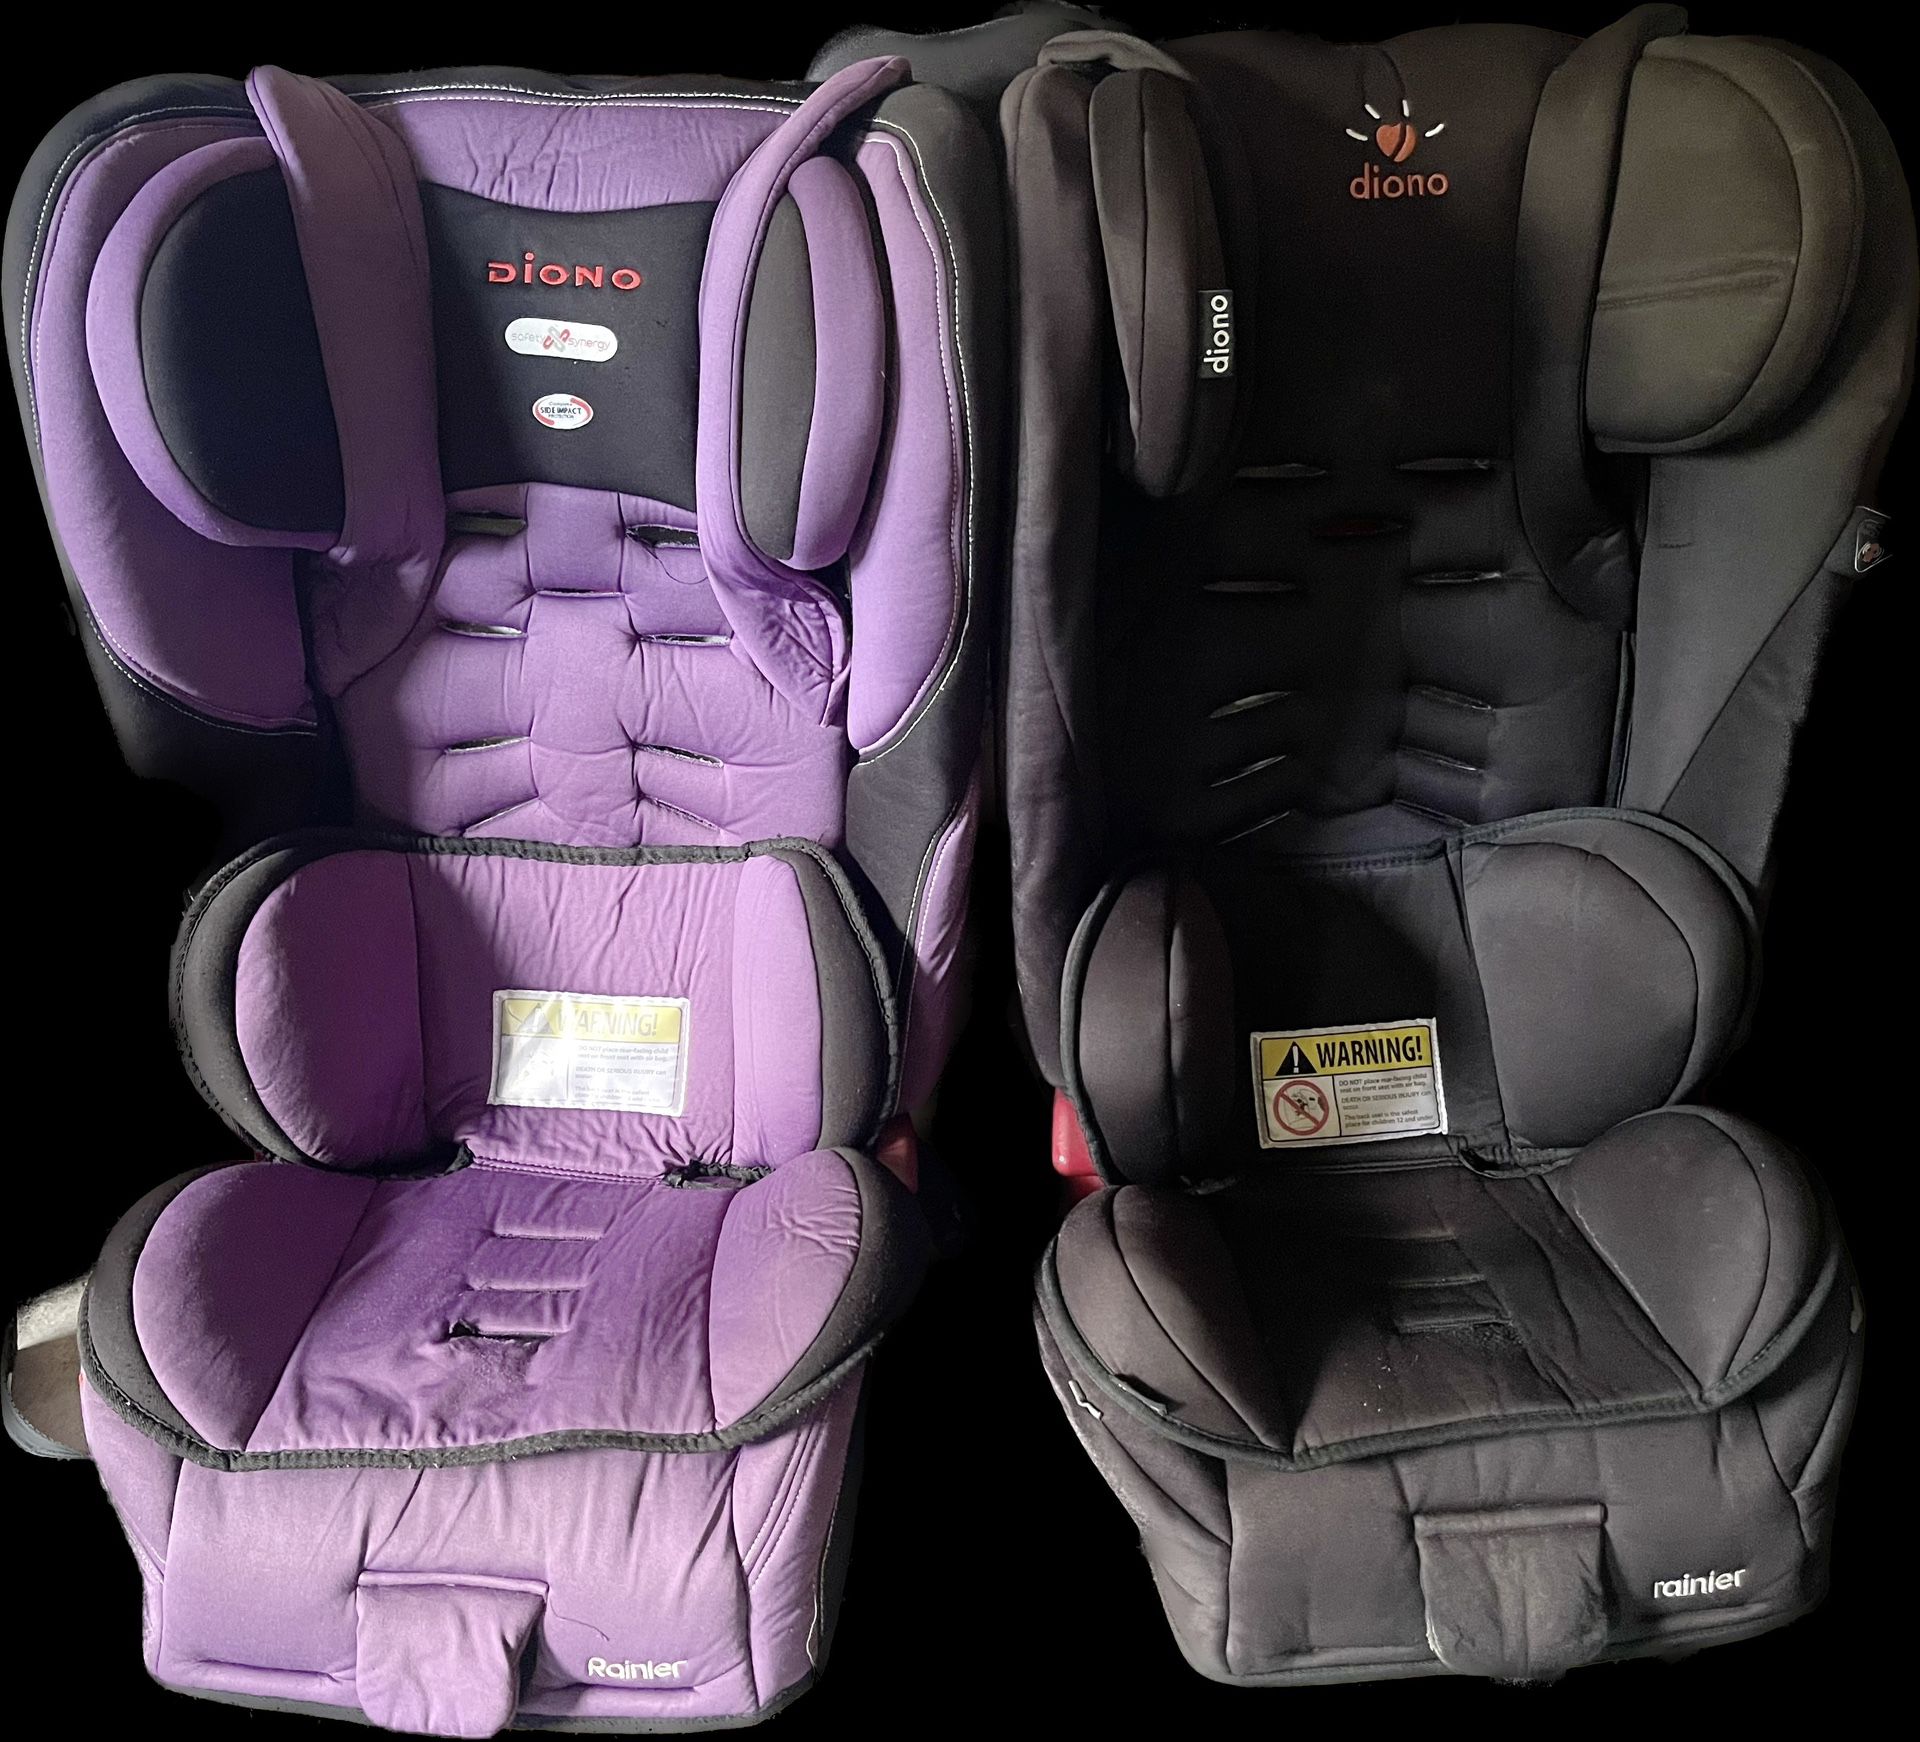 Diono High Back Convertible Car seat (black Only) With Booster Seat